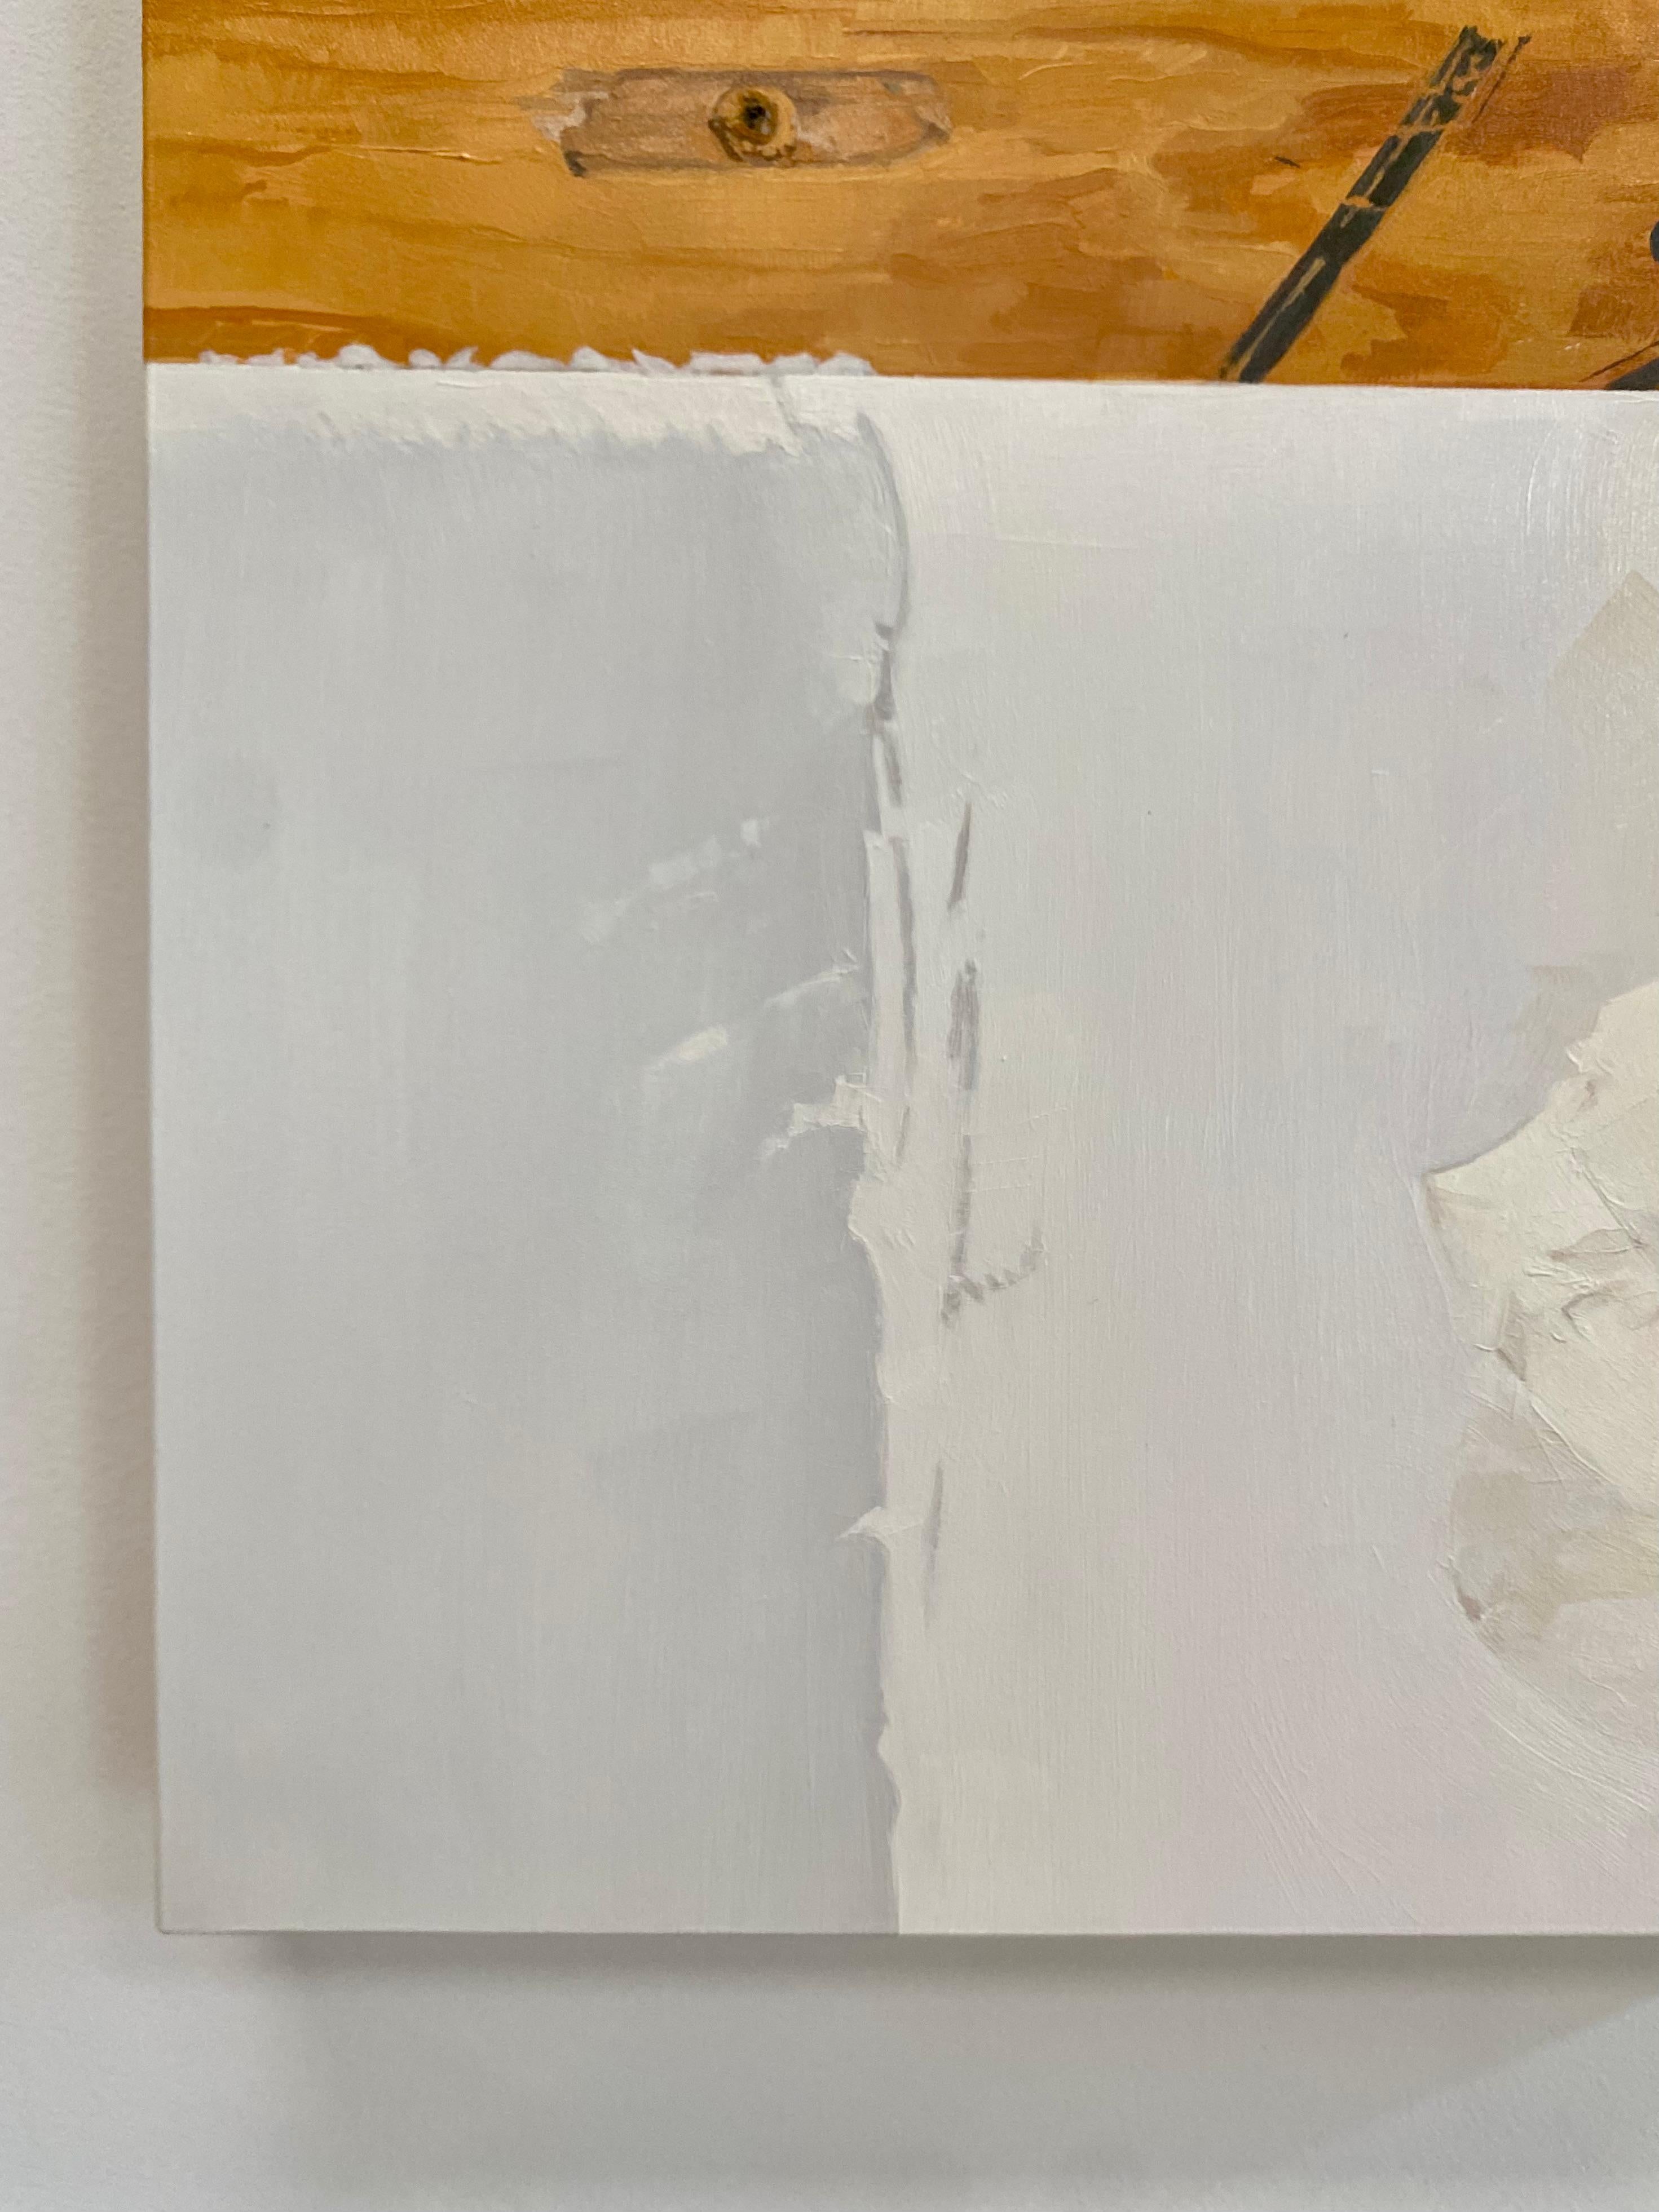 A patch of white paint adorns a wooden board with golden brown woodgrain, unexpectedly dramatic against a stark white wall. Signed, dated and titled on verso.

Brett Eberhardt’s painted interiors are inhabited by singular objects, and are vacant of